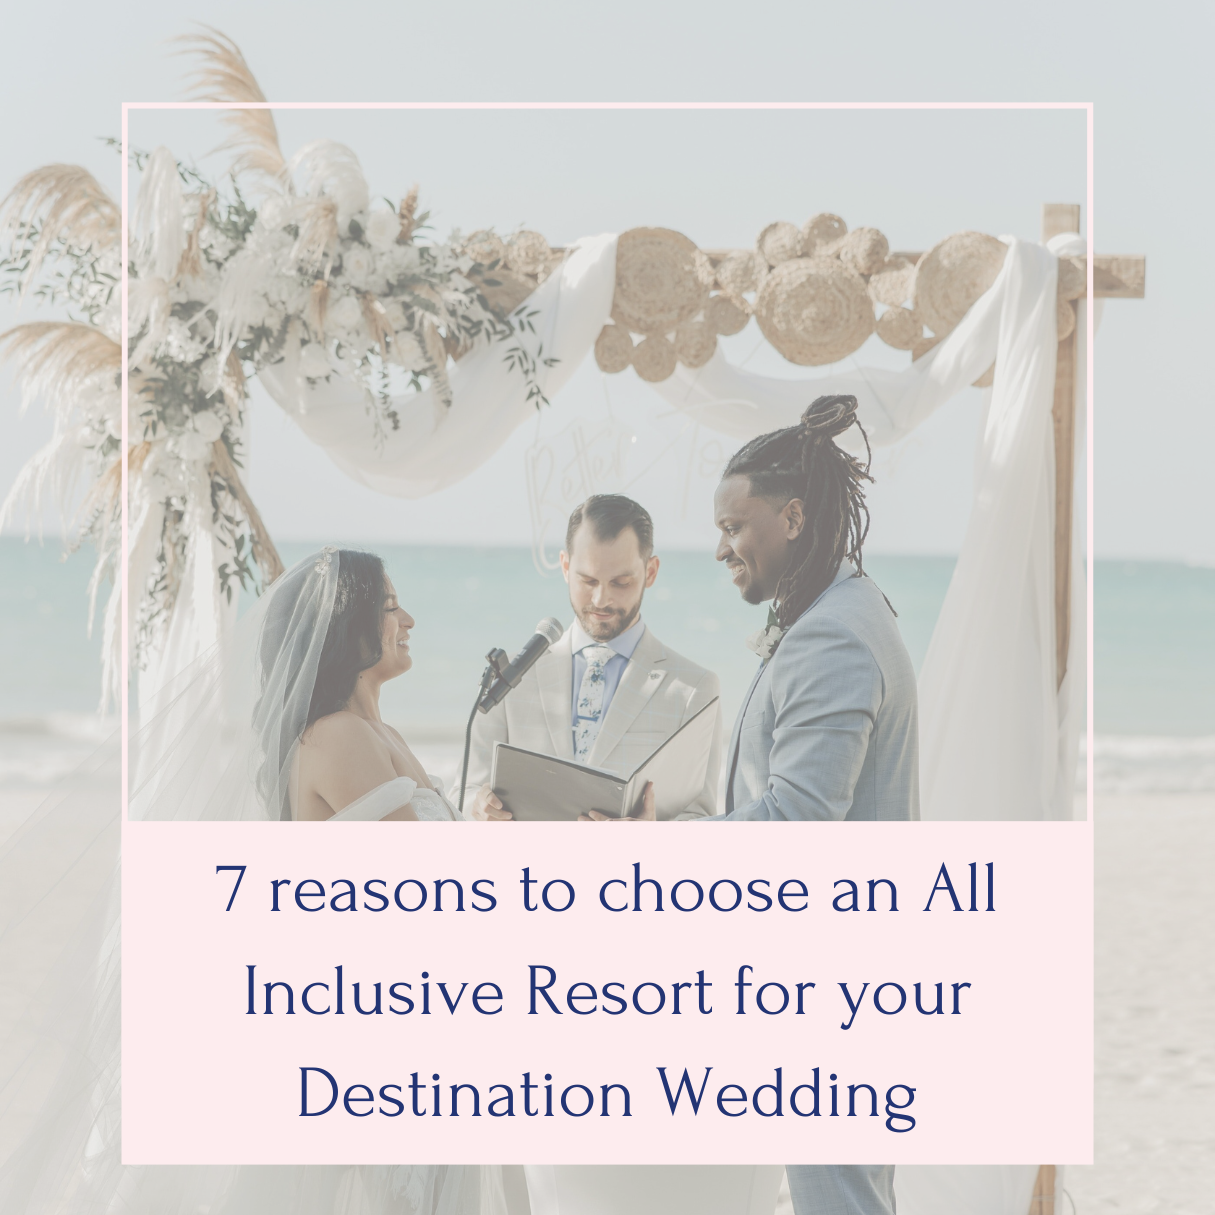 7 reasons your should have your Destination Wedding at an All Inclusive Resort